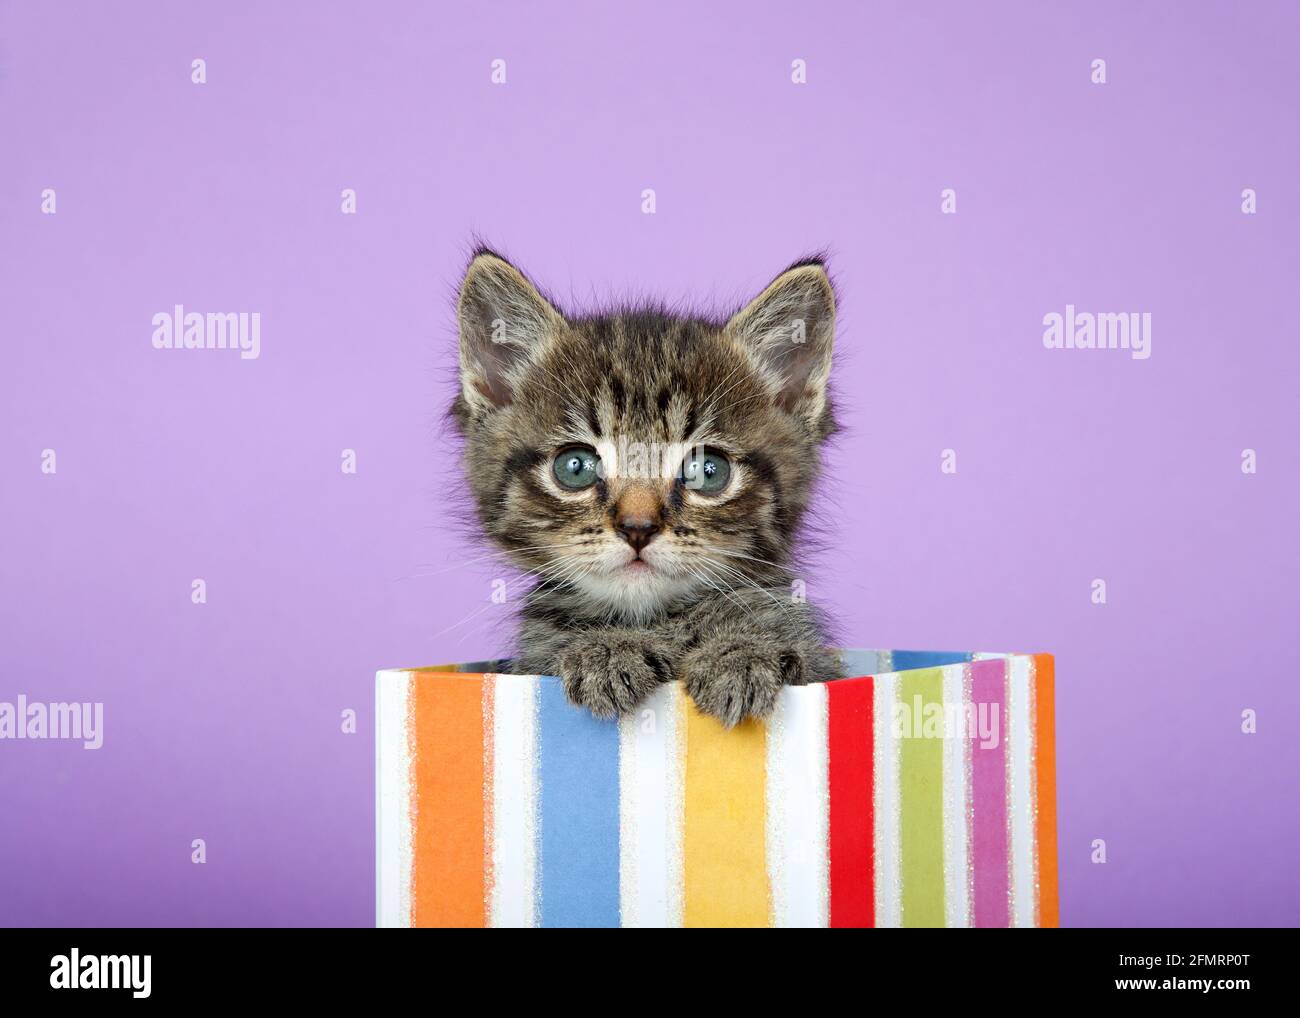 Close up portrait of one adorable tabby kitten peeking out of a colorful striped present box. Light Lavender Purple background. Stock Photo